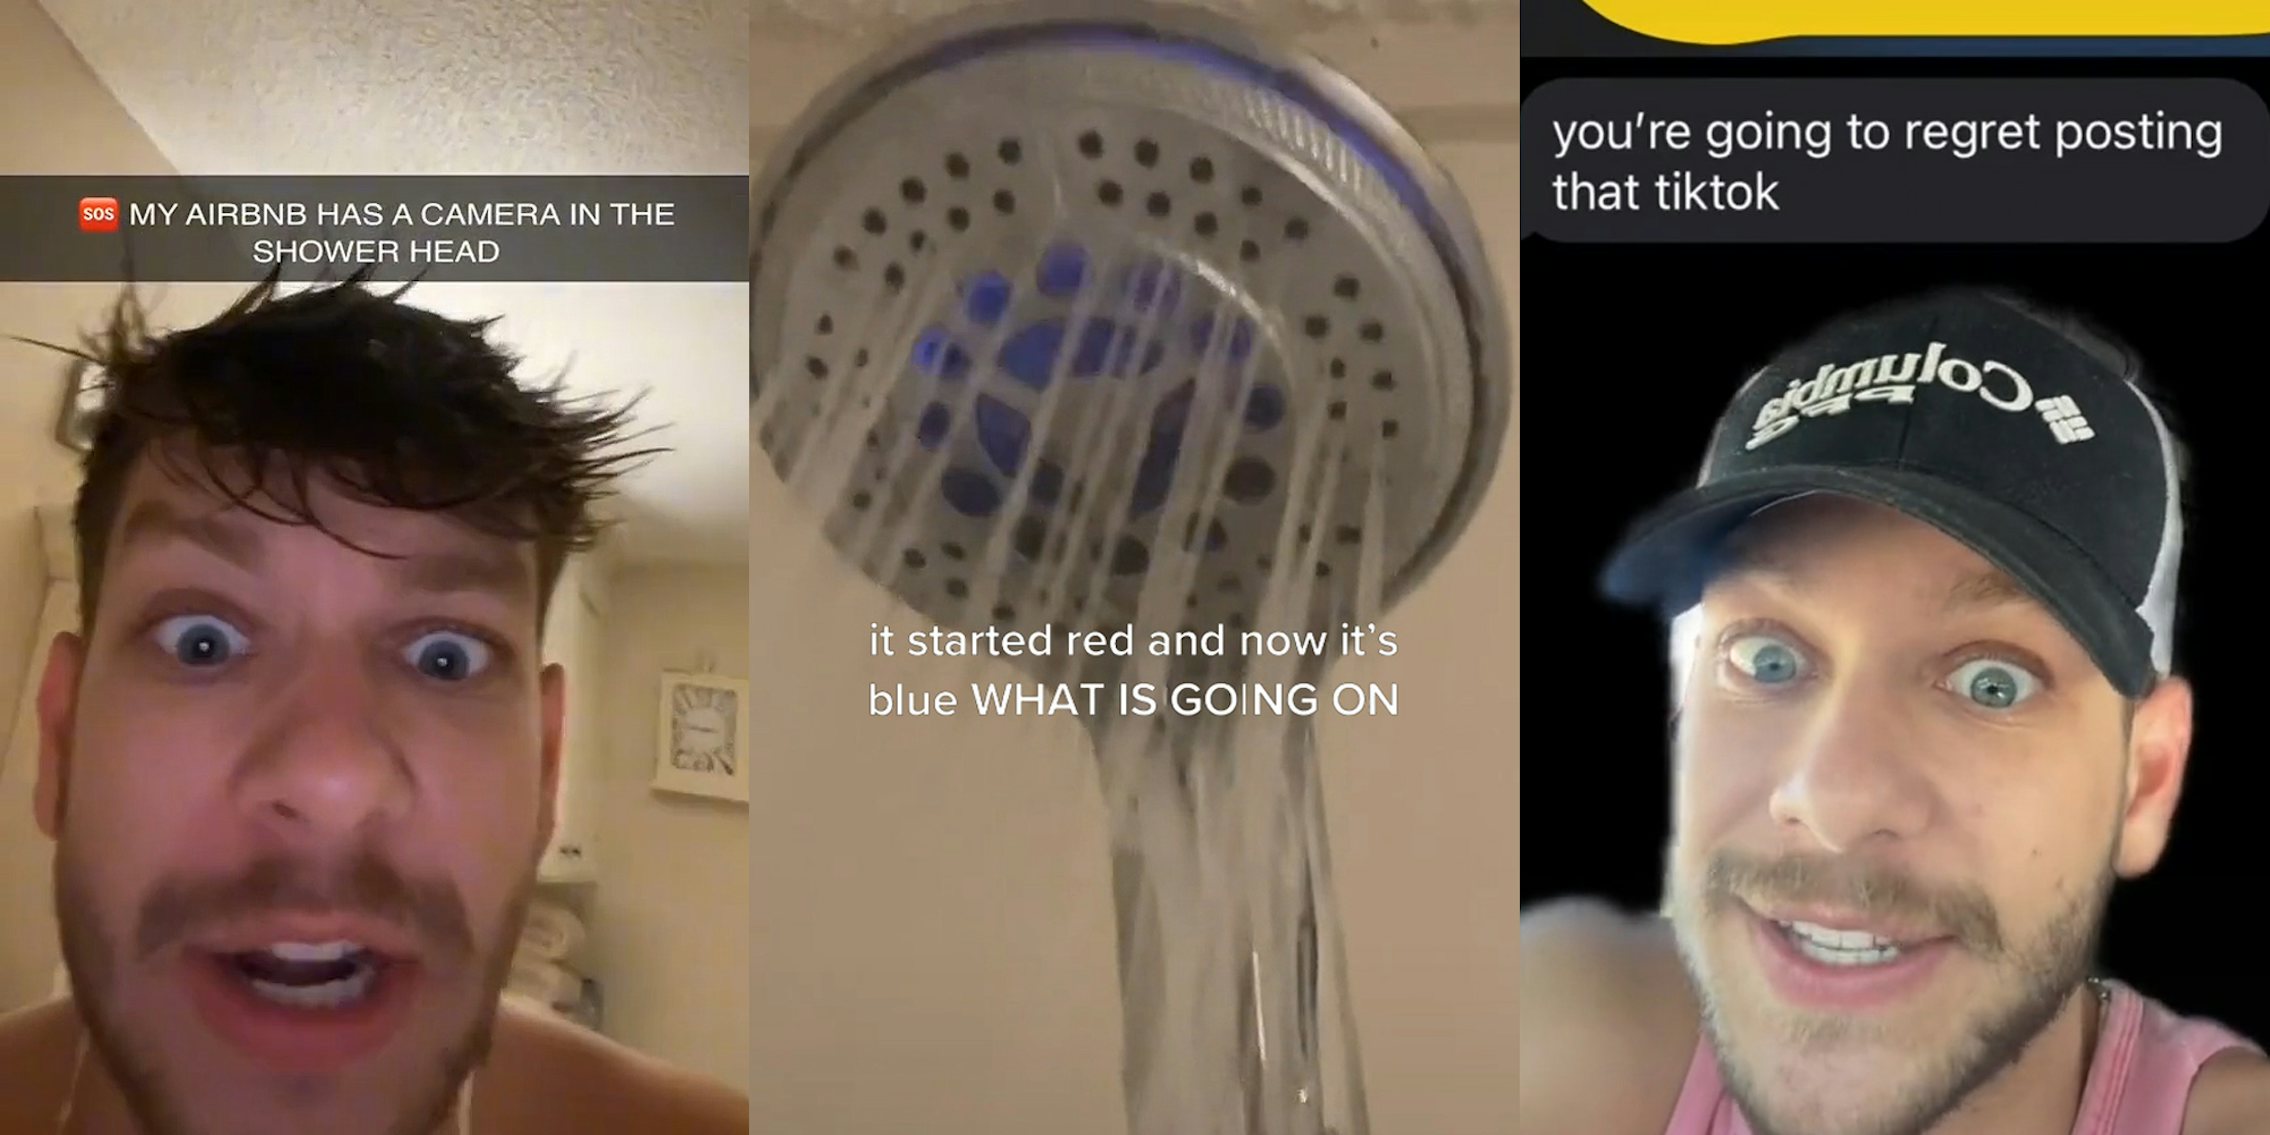 man speaking socked shirtless caption 'MY AIRBNB HAS A CAMERA IN THE SHOWER HEAD' (l) shower head with g=blue light on caption 'it started red and now it's blue WHAT IS GOING ON' (c) man greenscreen tiktok speaking shocked expression over messages caption 'you're going to regret posting that tiktok' (r)